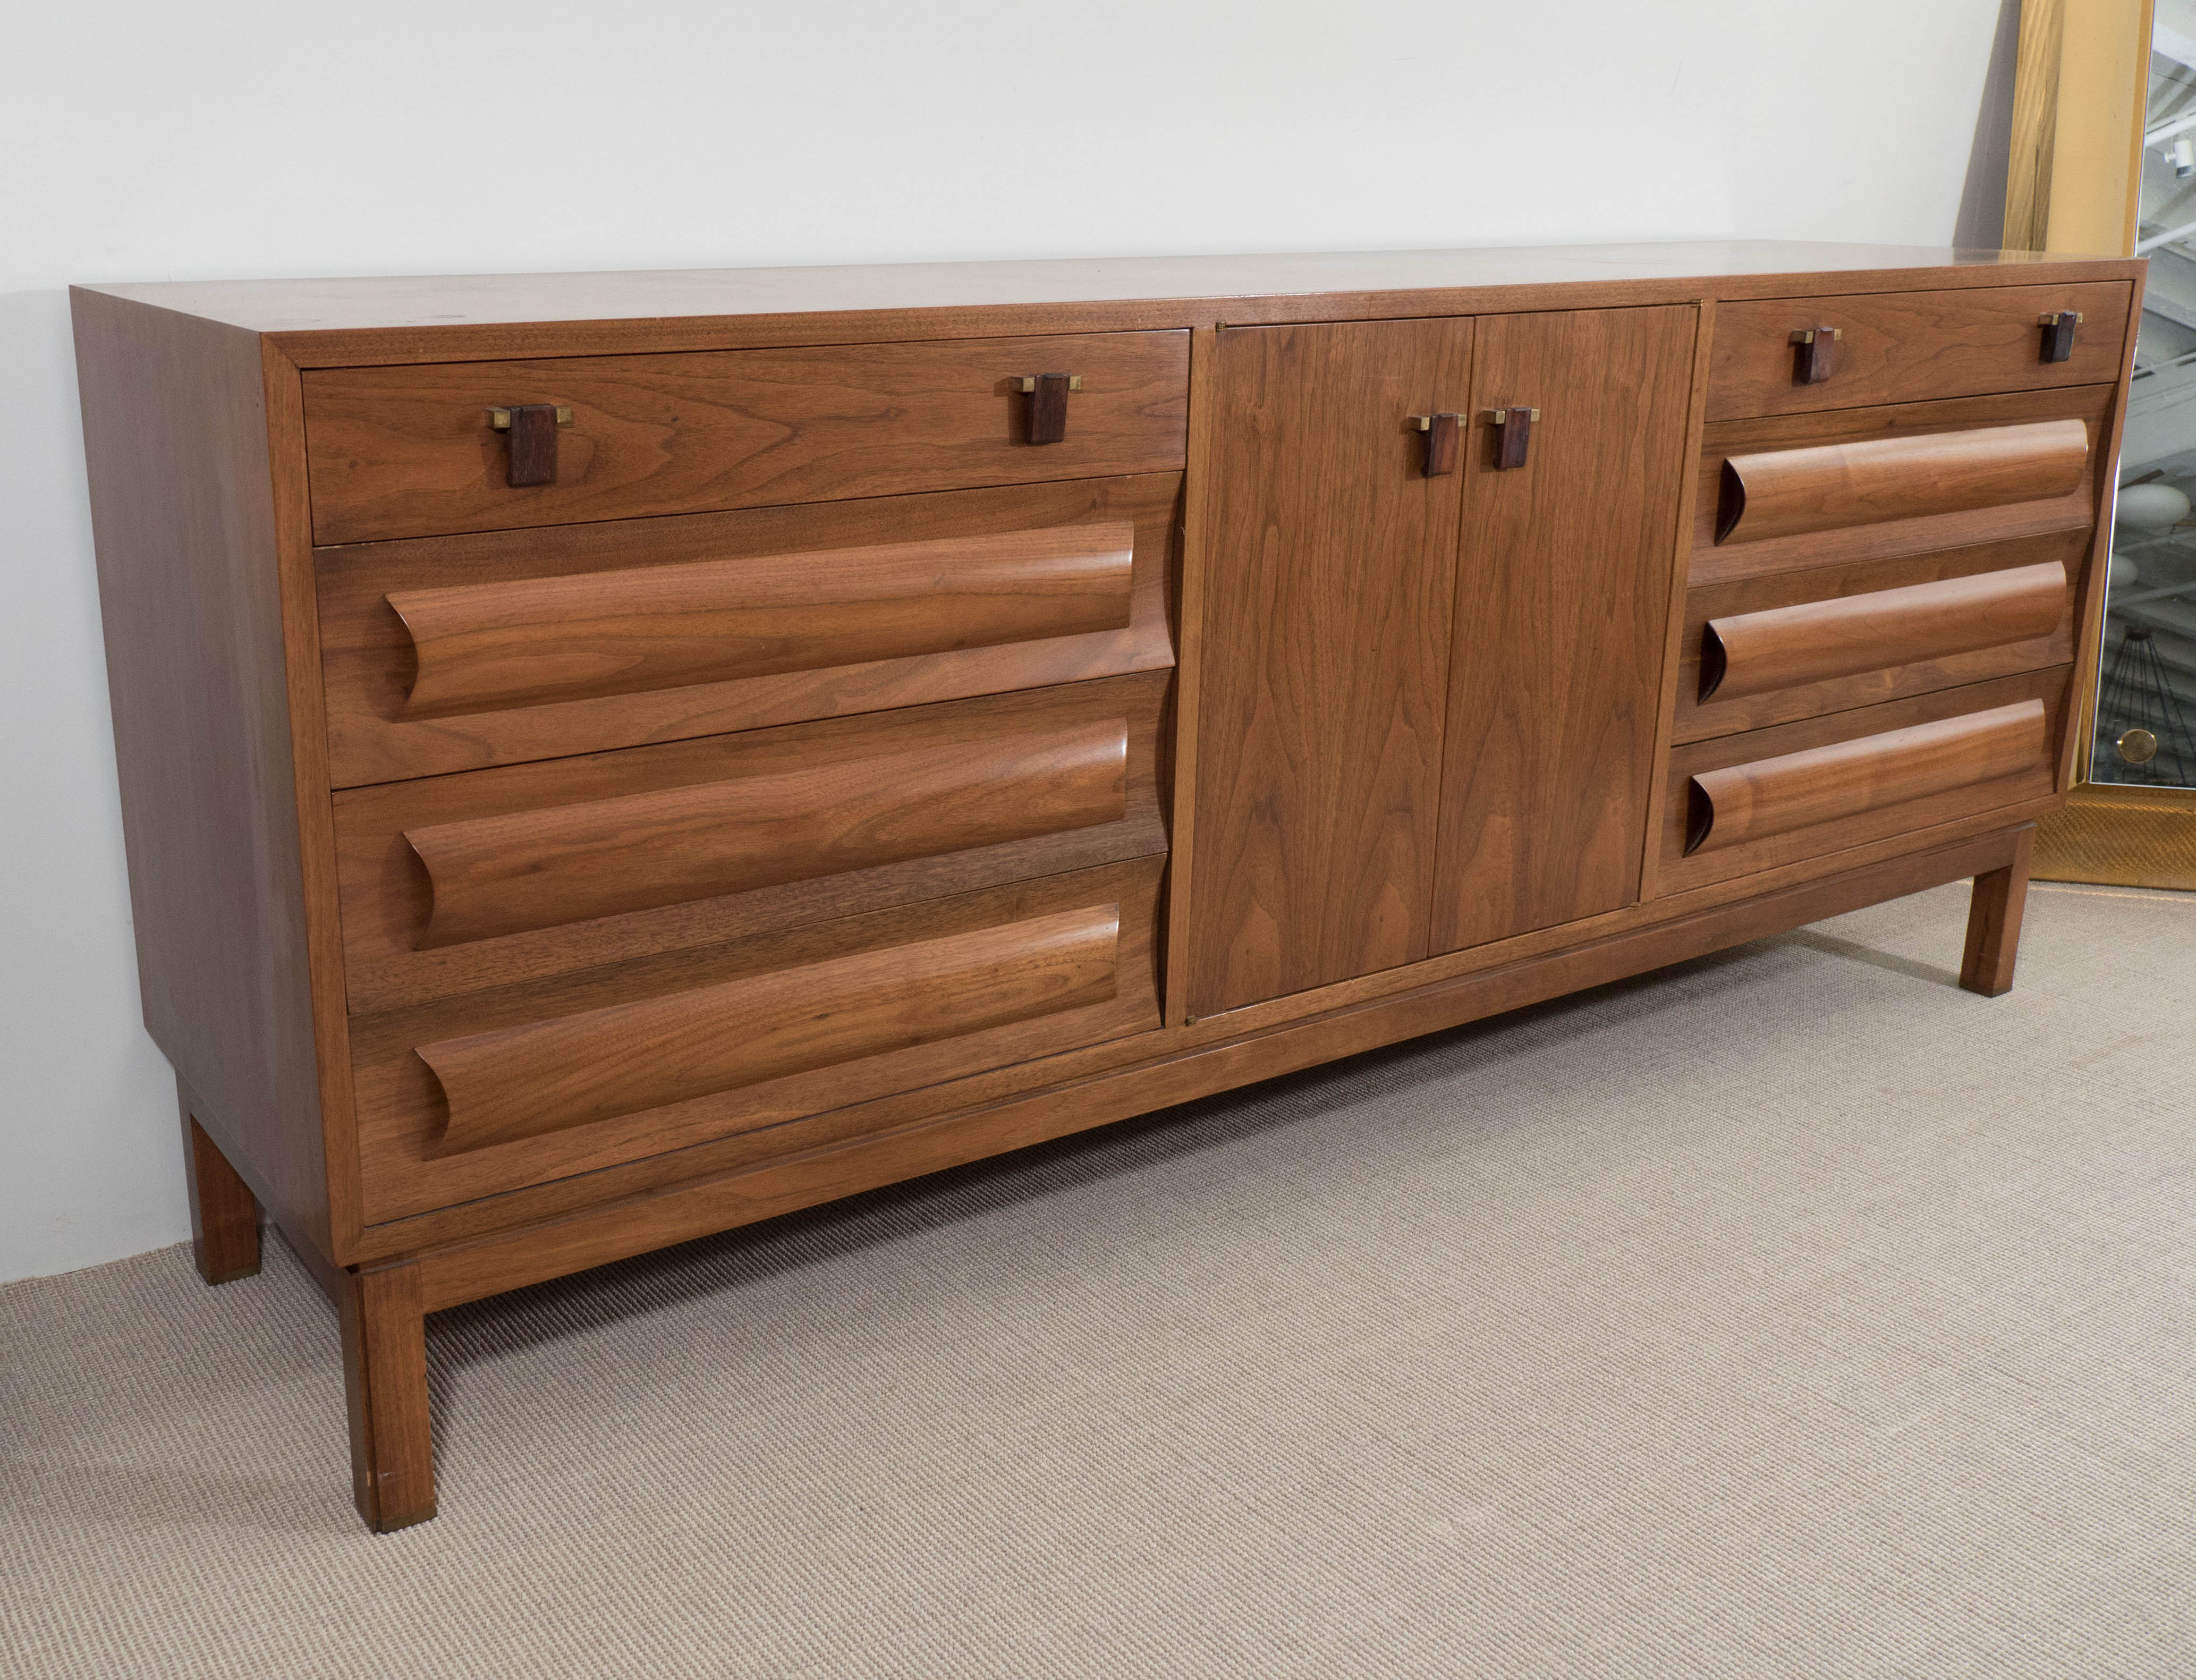 Edward Wormley Dunbar Sideboard, Drawers and Doors with Shelves, circa 1958 In Excellent Condition For Sale In New York, NY